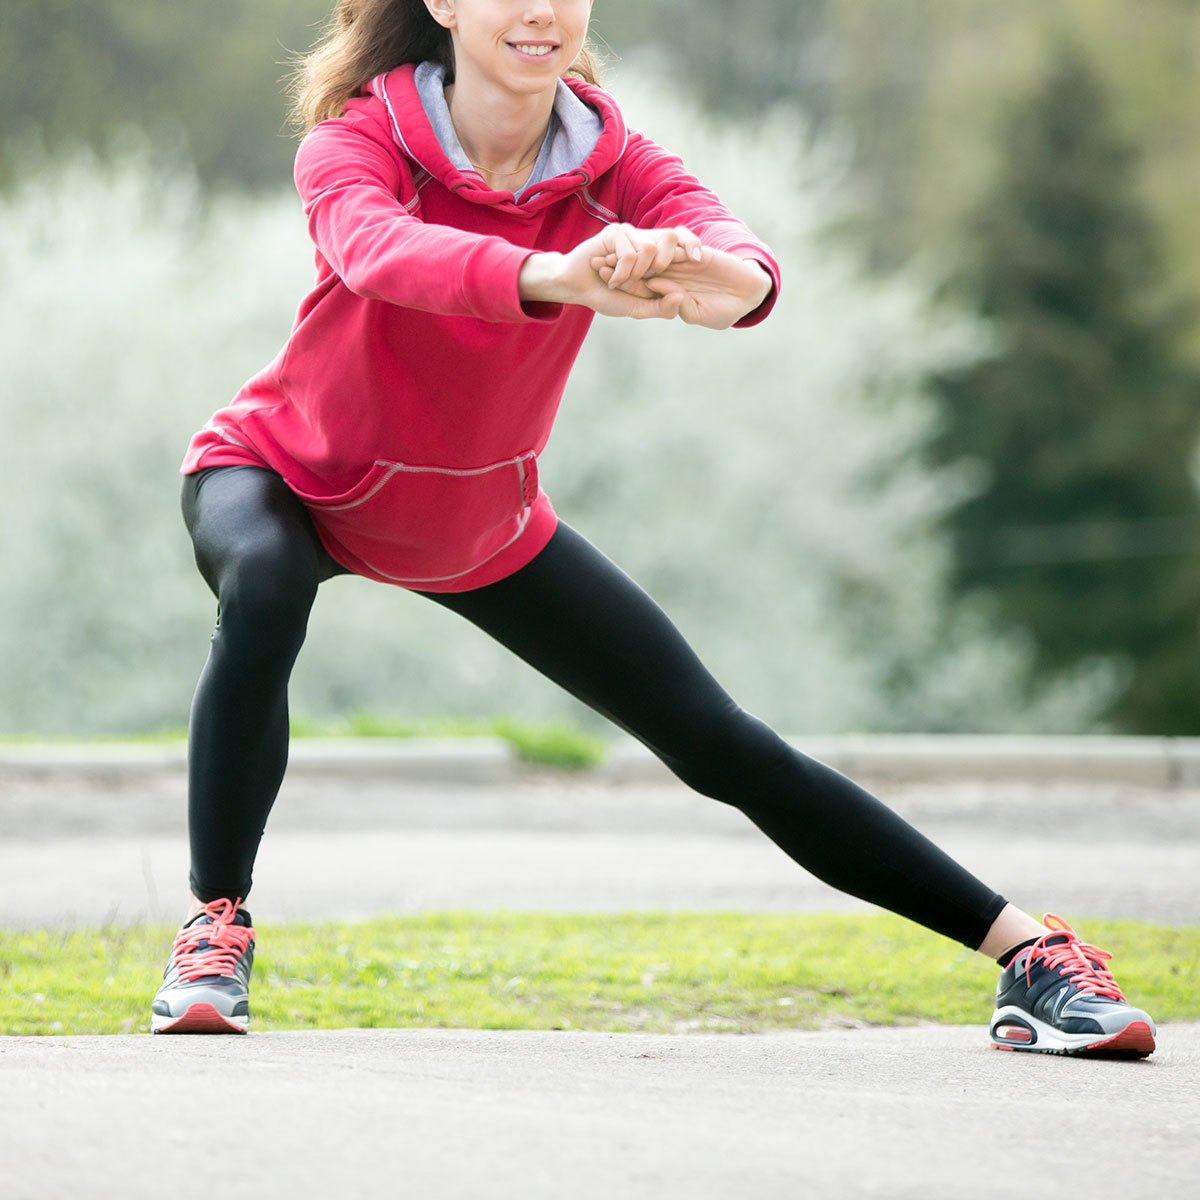 3 Quick Morning Exercises To Tone Muscles And Blast Fat Over 50